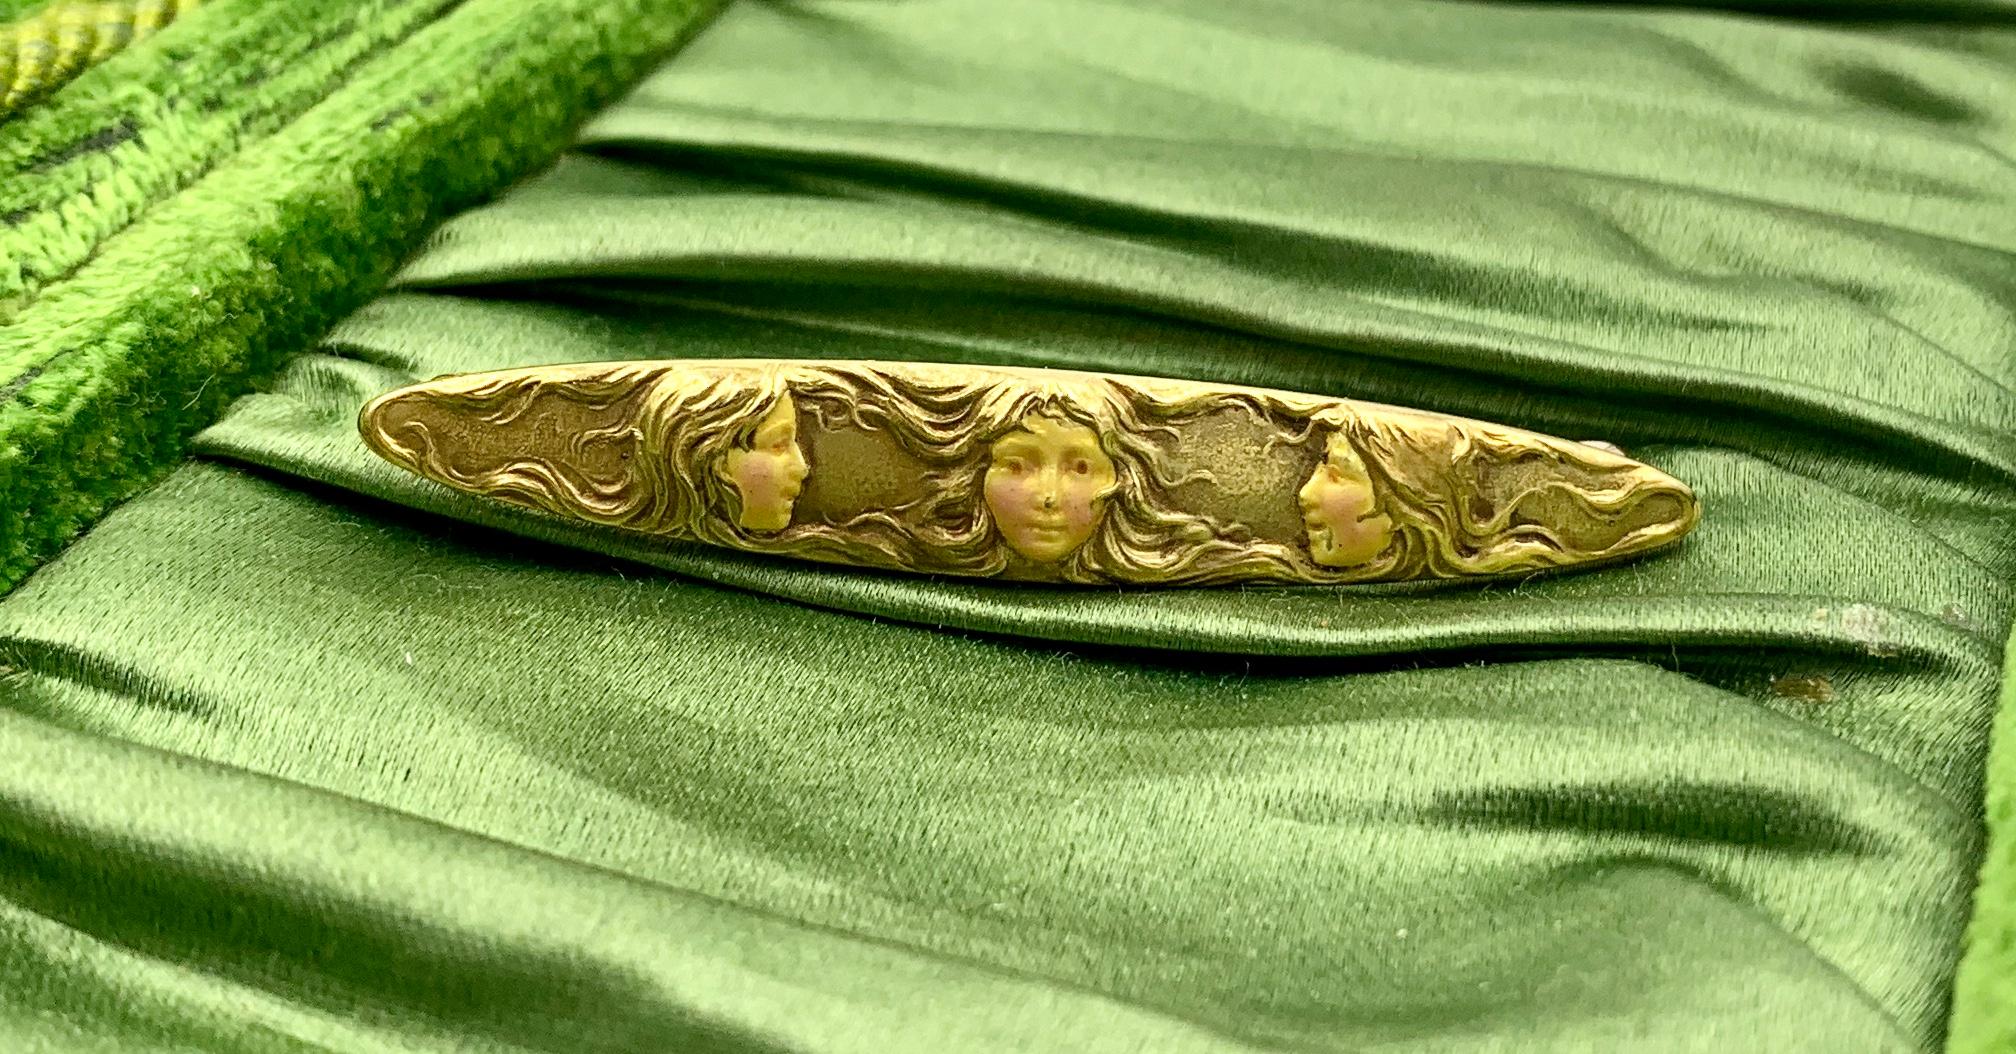 A spectacular Art Nouveau brooch with images of three maidens in 14 Karat Gold with fine Enamel decoration.  The extraordinary Art Nouveau brooch features the faces of three women.  The women's faces are decorated with enamel.  The women's hair